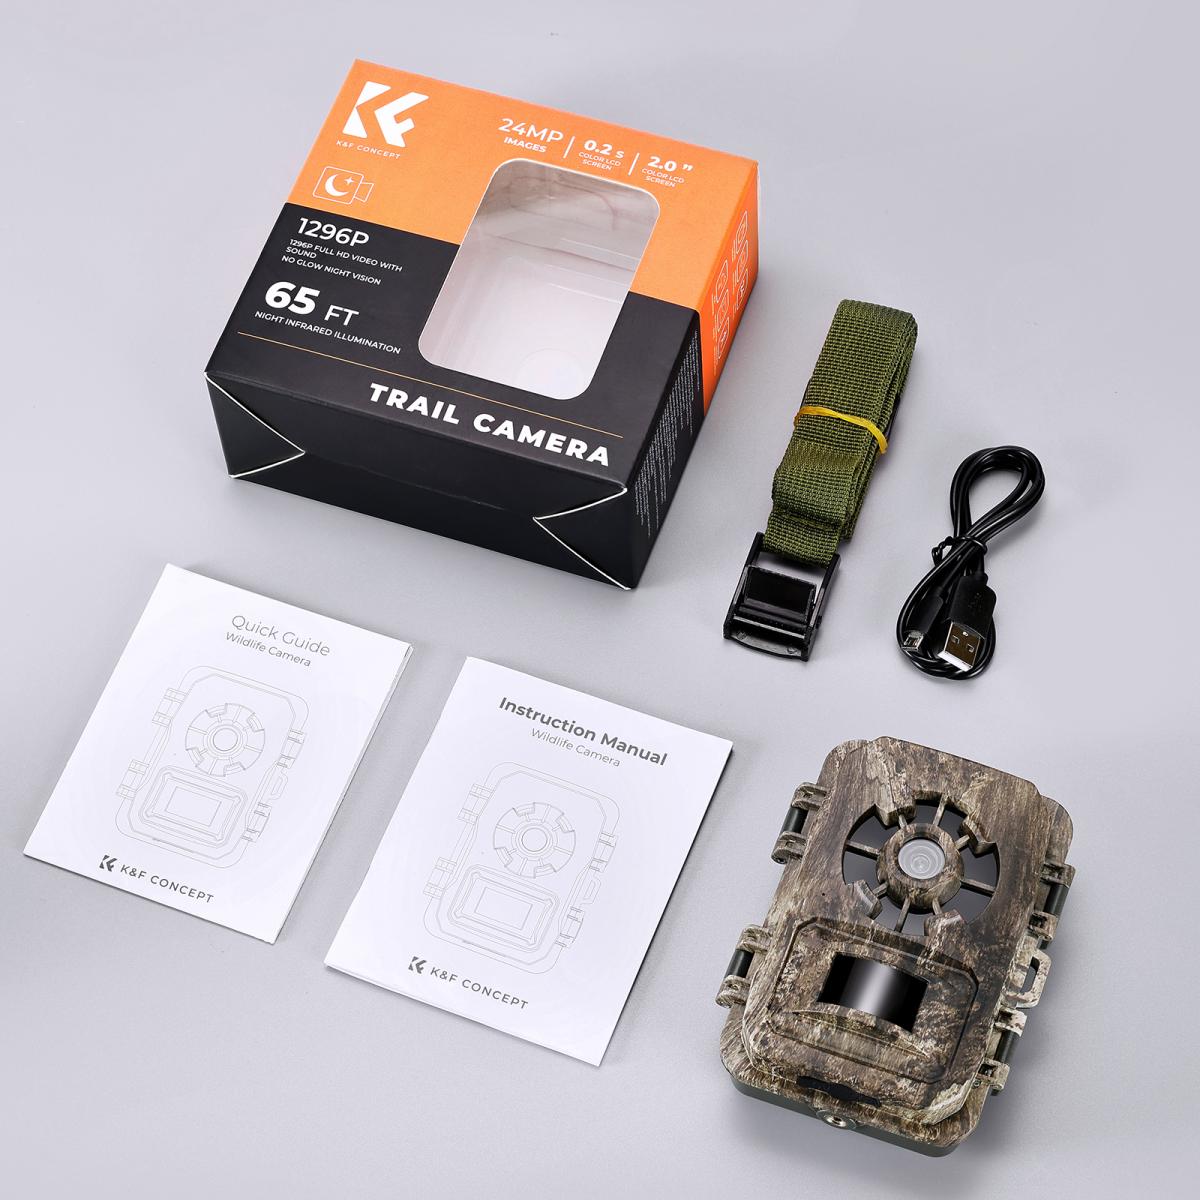 K&F Concept Wildlife security Trail Camera, 24MP photos & 1296P/30fps video with 2 inch screen - dead wood